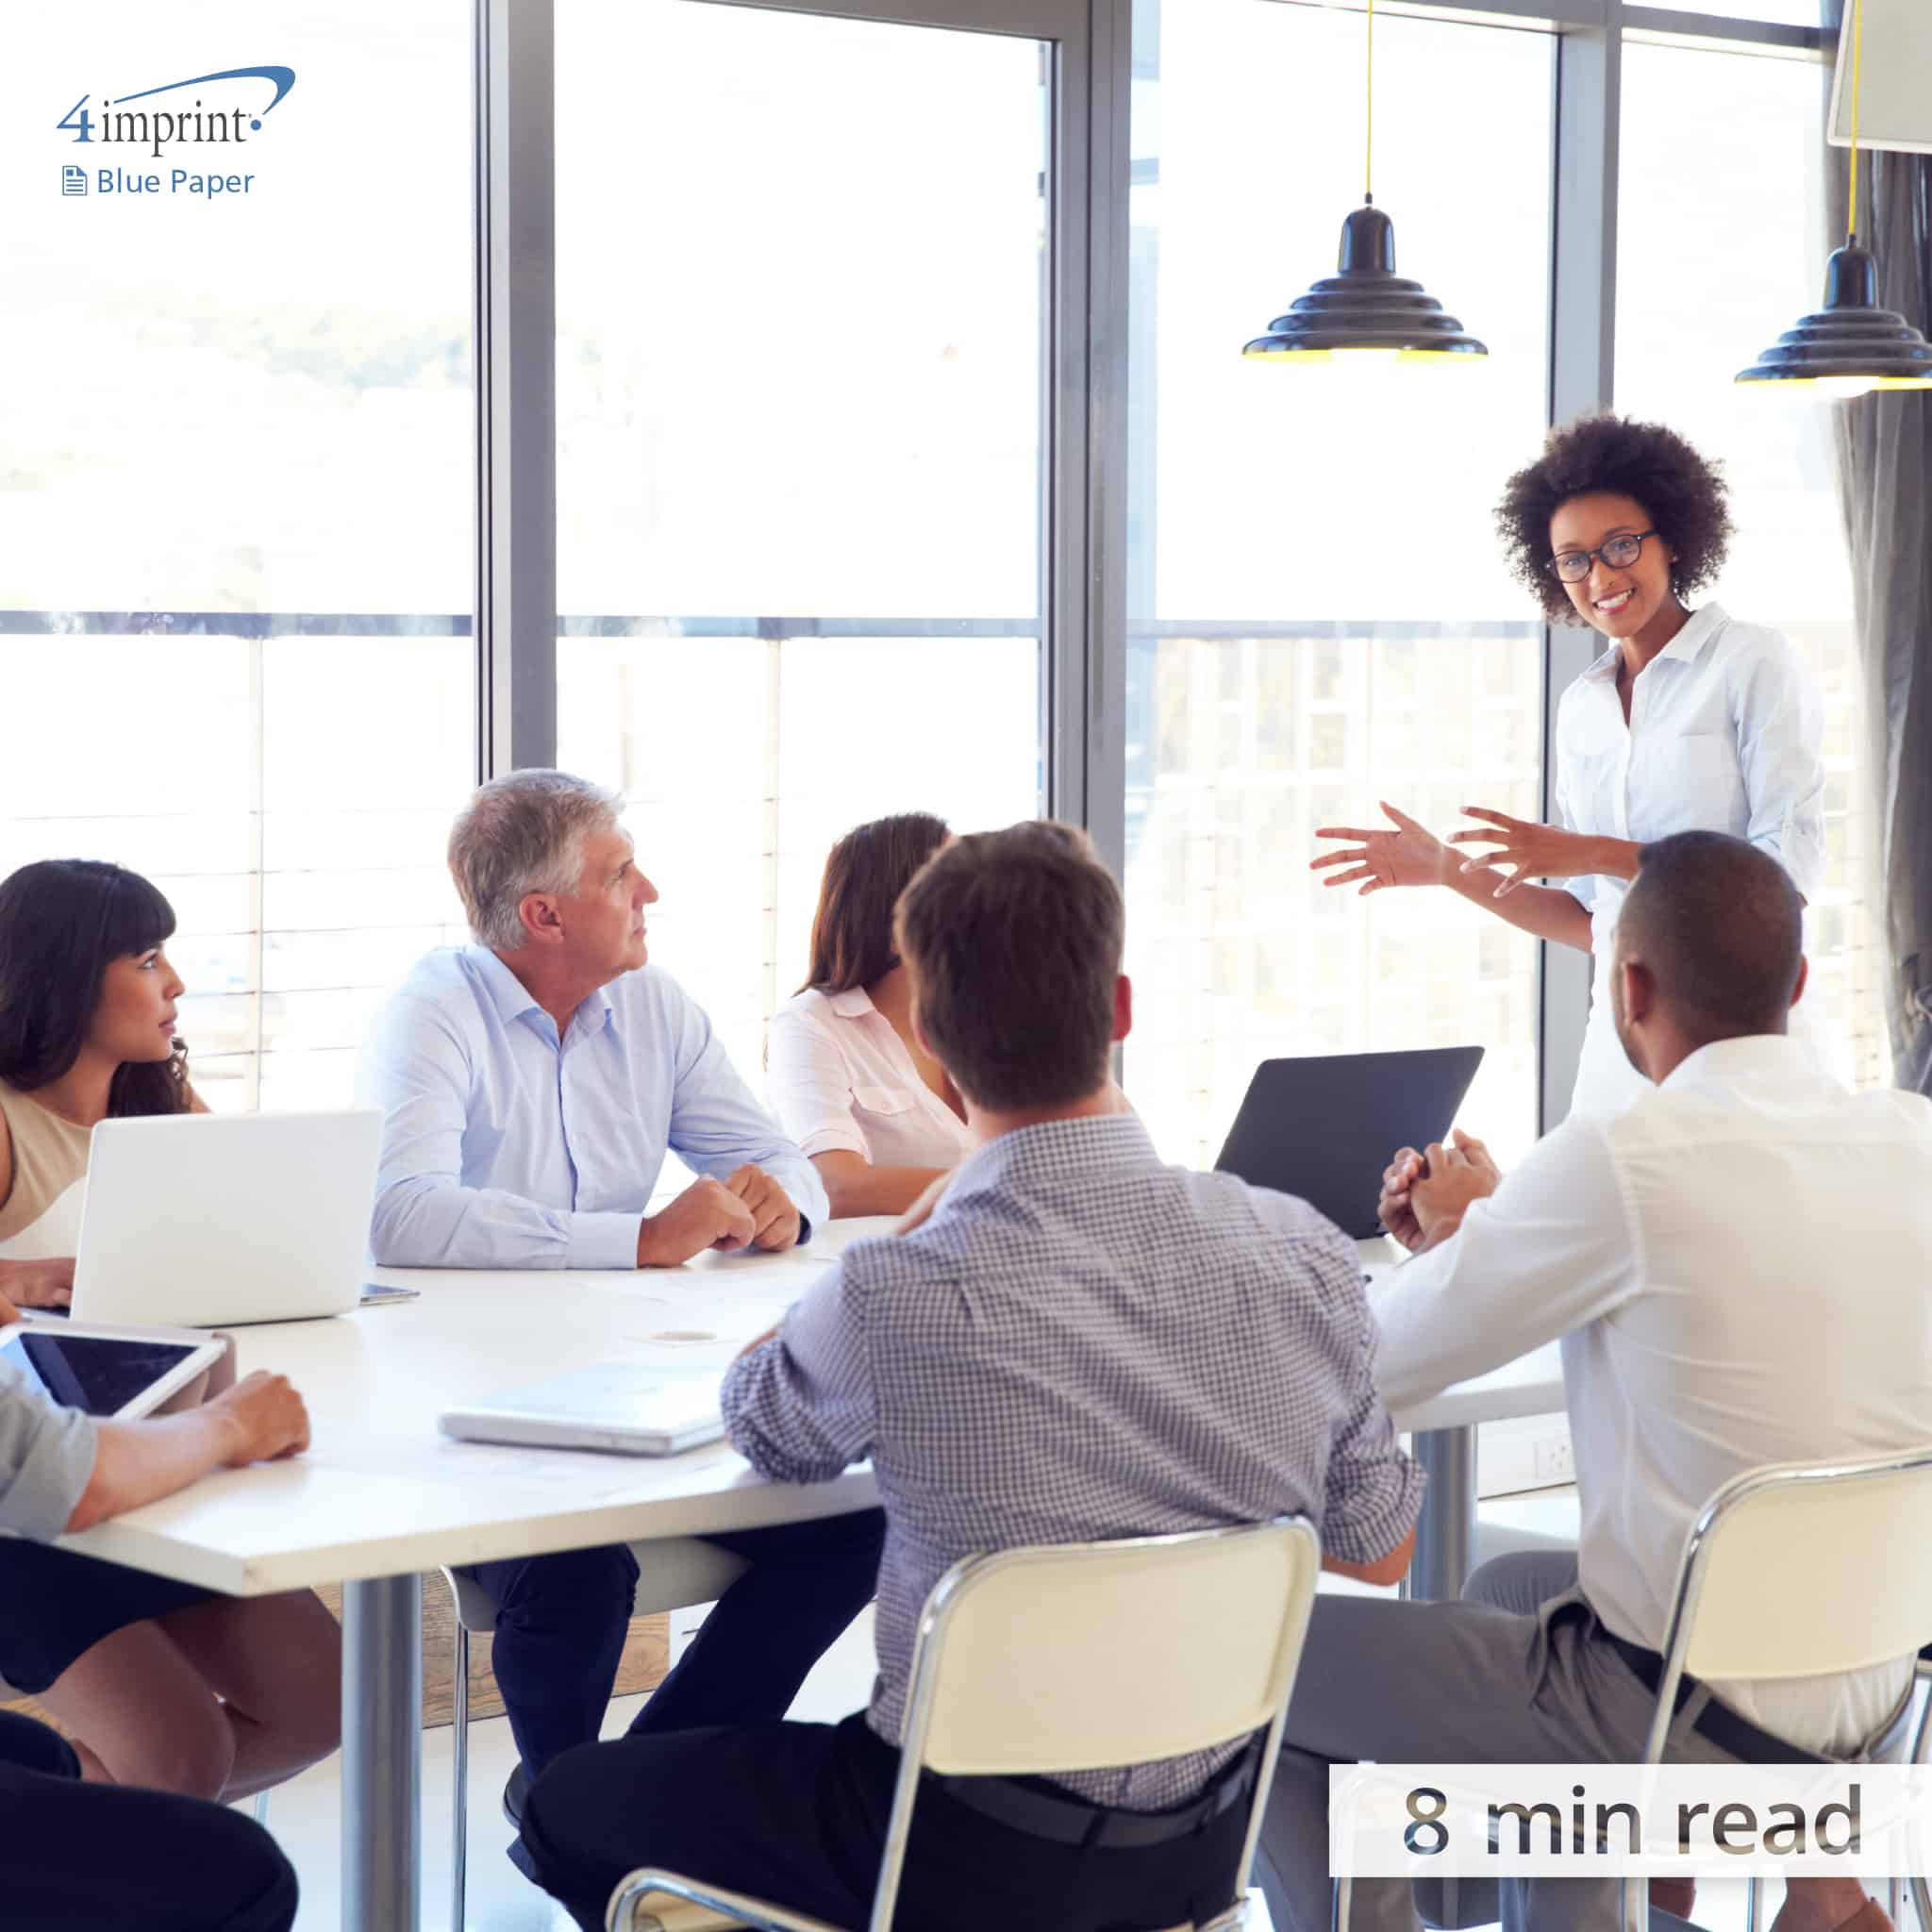 Picture showing people having a meeting for an article about effective meetings.